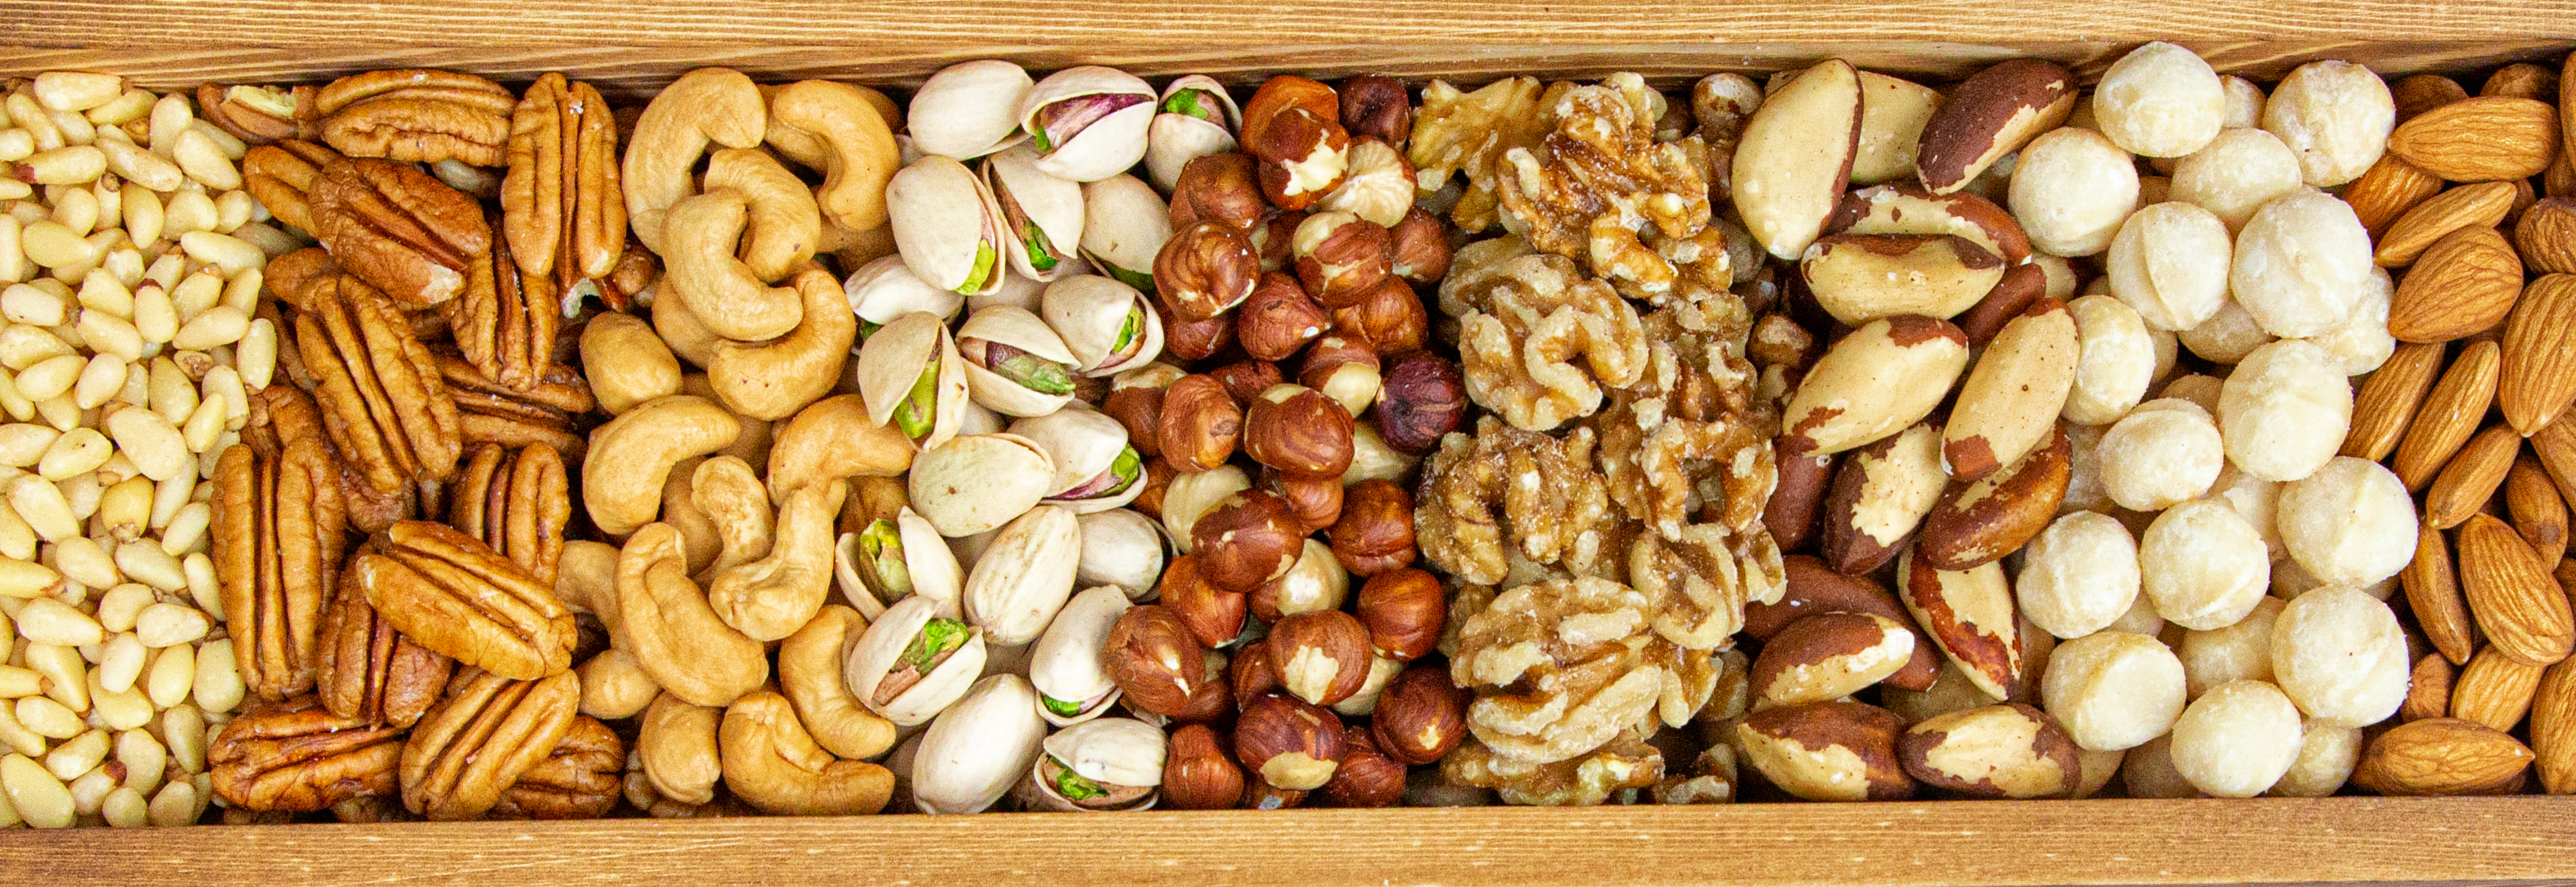 Go Nuts for a Healthy Weight!